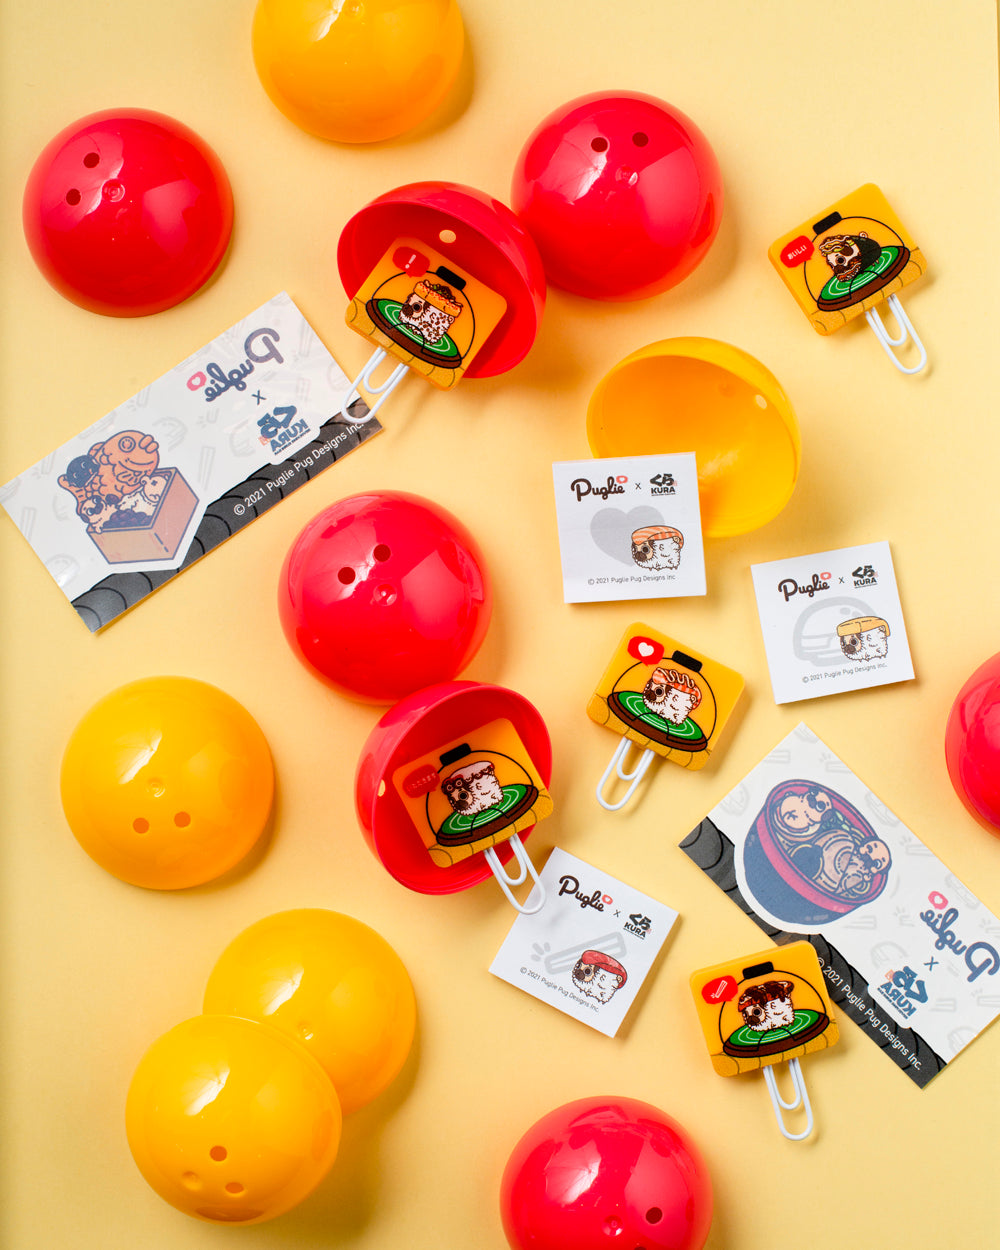 Assortment of Puglie's Kura Sushi Prizes - Rubber Bookmarks, Temporary Tattoos, Mini Notepads - arranged amongst yellow and red gachapon capsules.